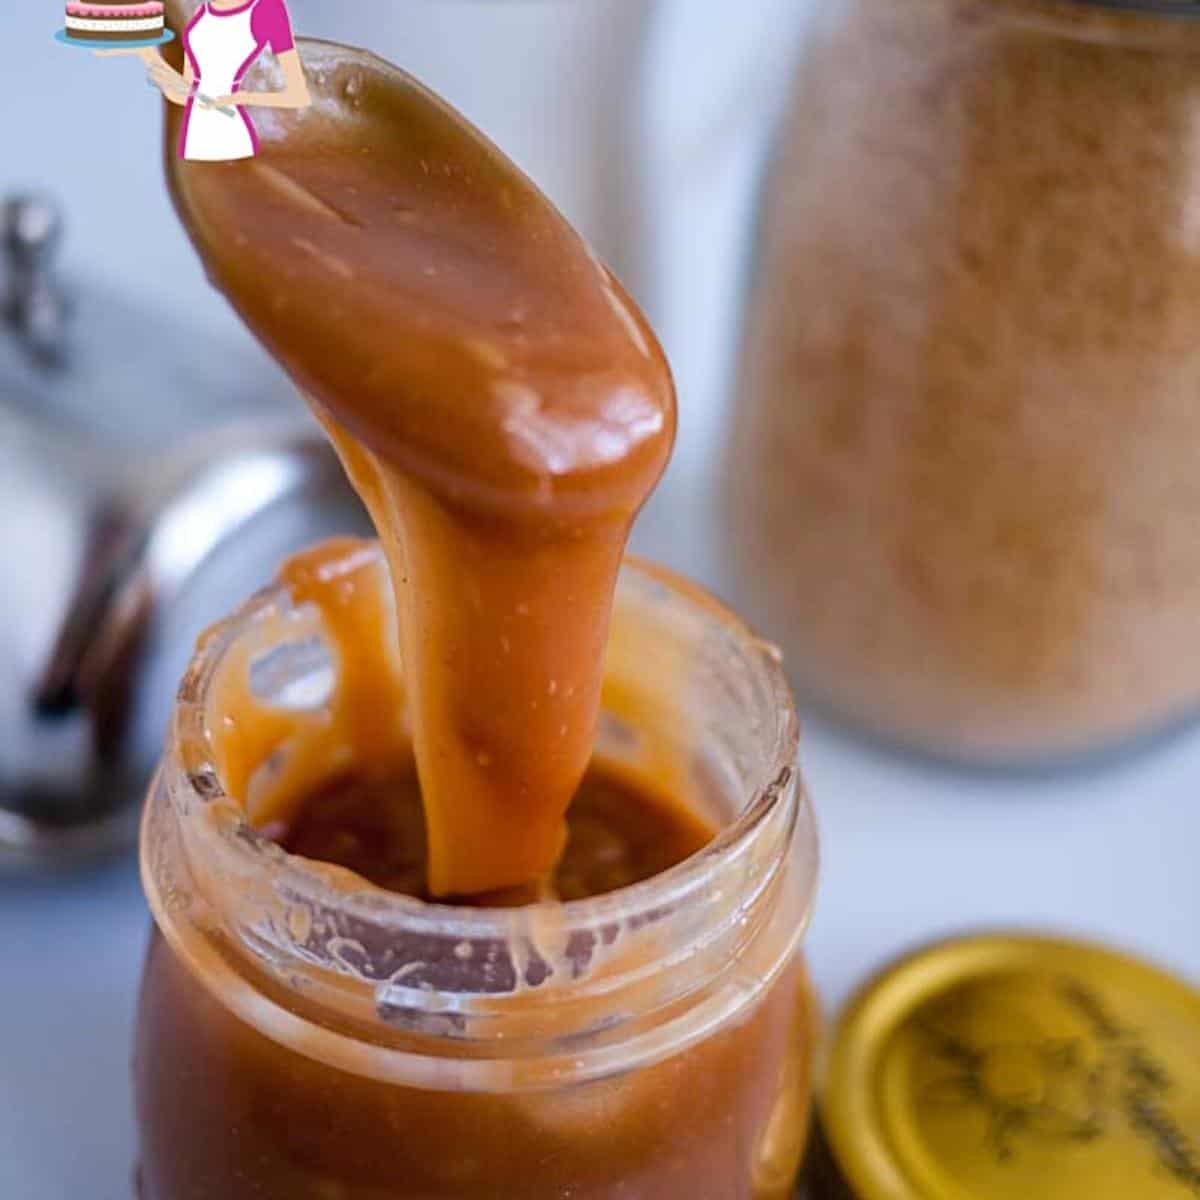 Pouring butterscotch from a spoon.